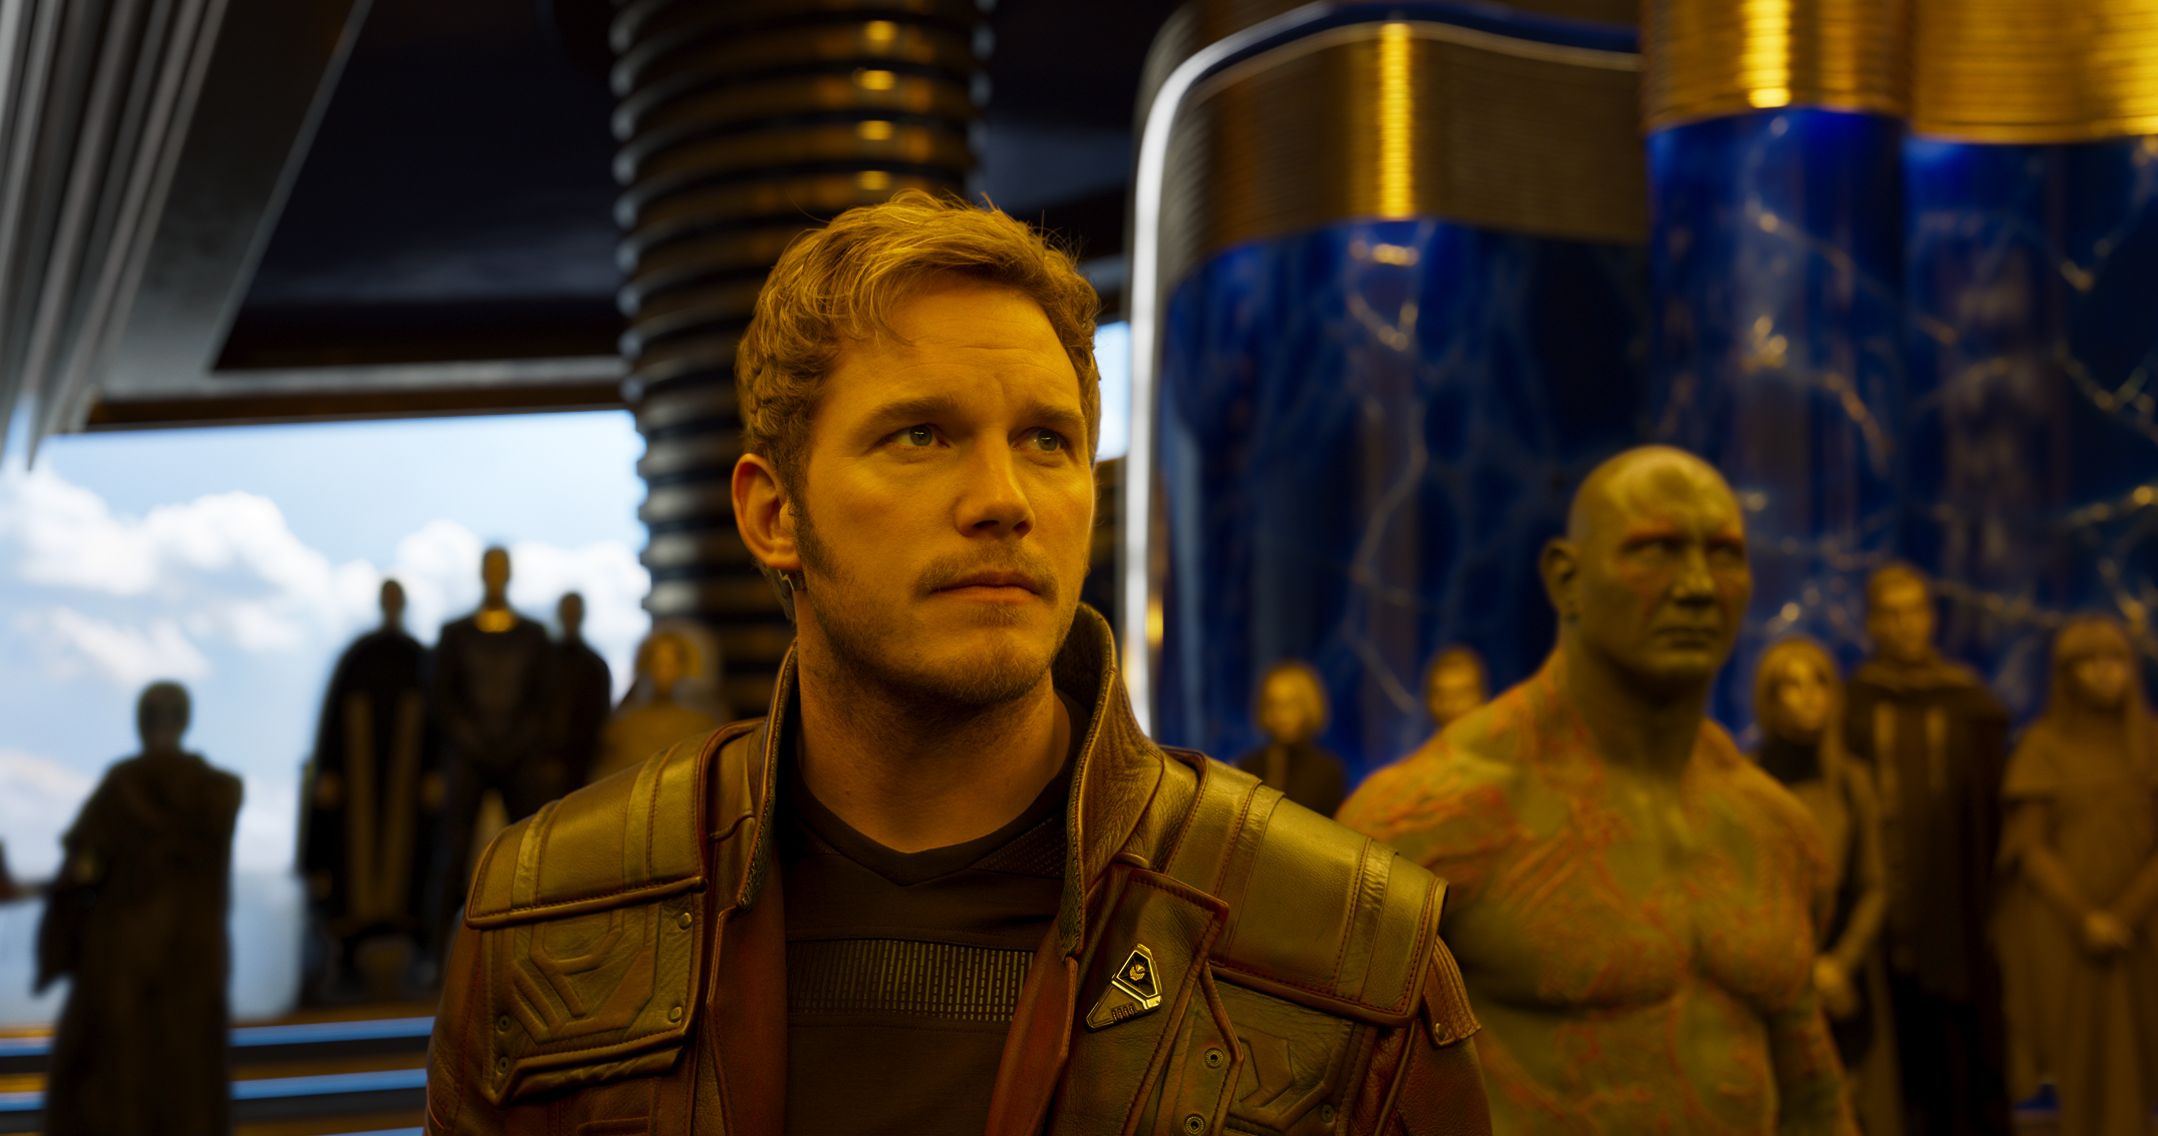 guardians of the galaxy full movie hd download in tamil